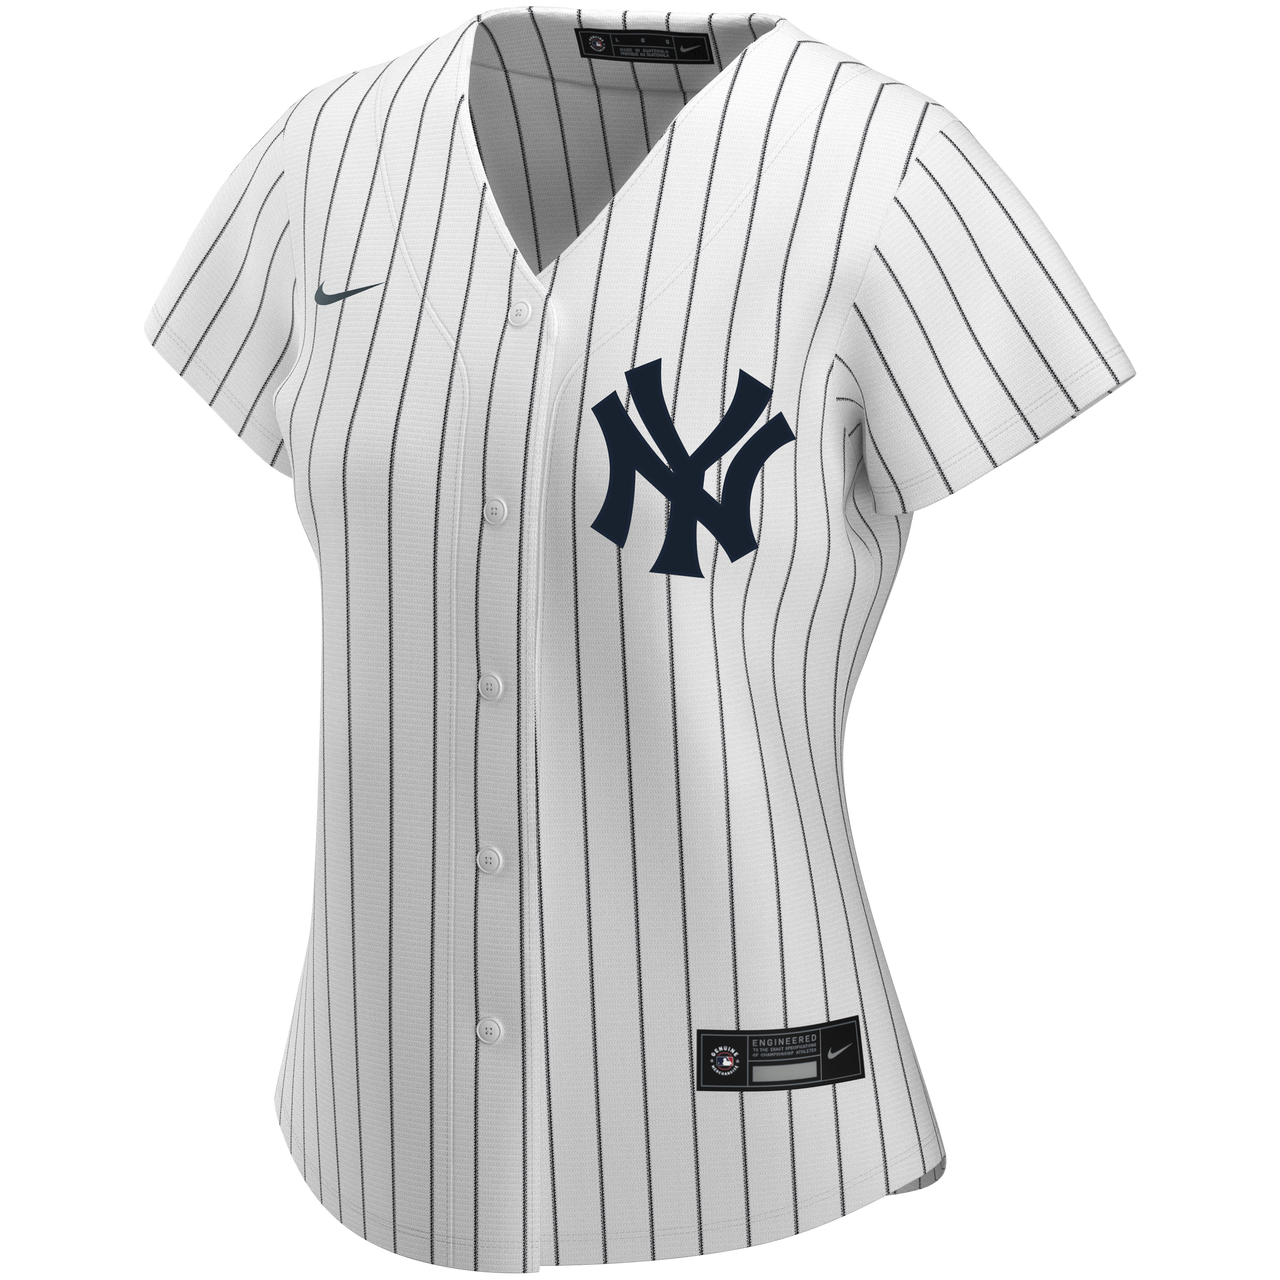 Mickey Mantle Cooperstown Replica Jersey